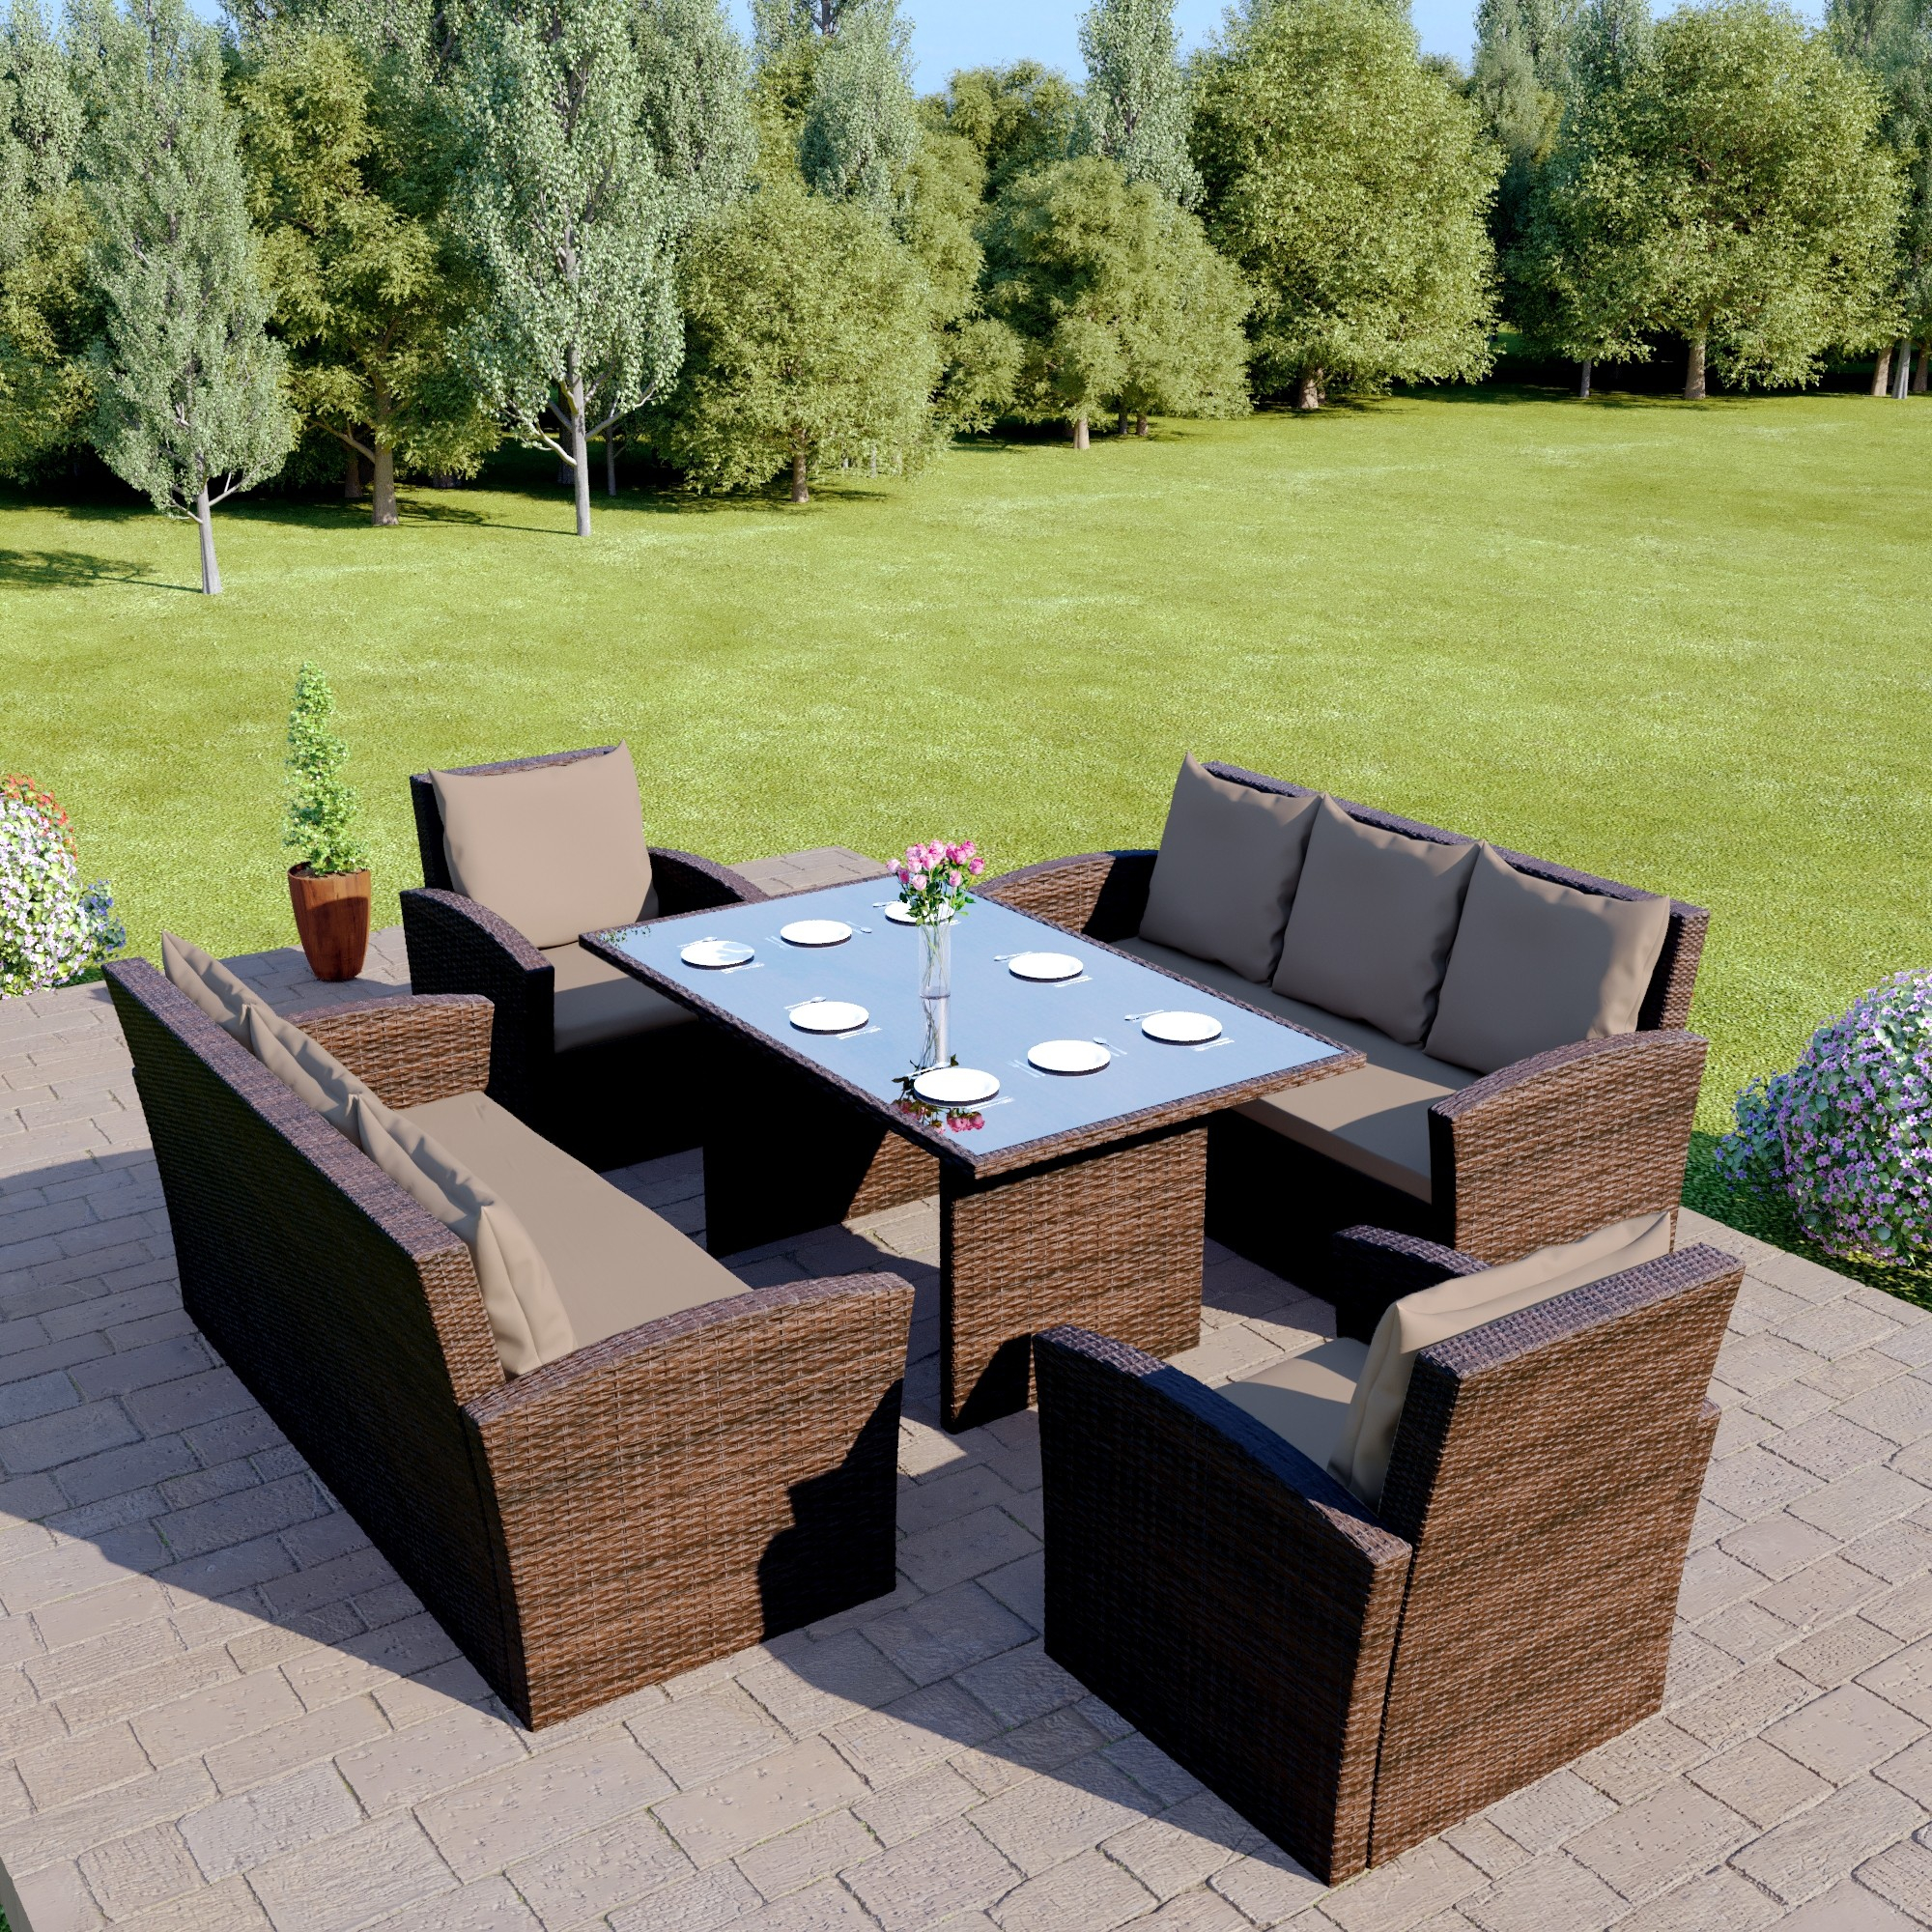 Details About Rattan Garden Dining Table Furniture Patio Set 8 Seat Sofa Black Grey Brown within proportions 2000 X 2000